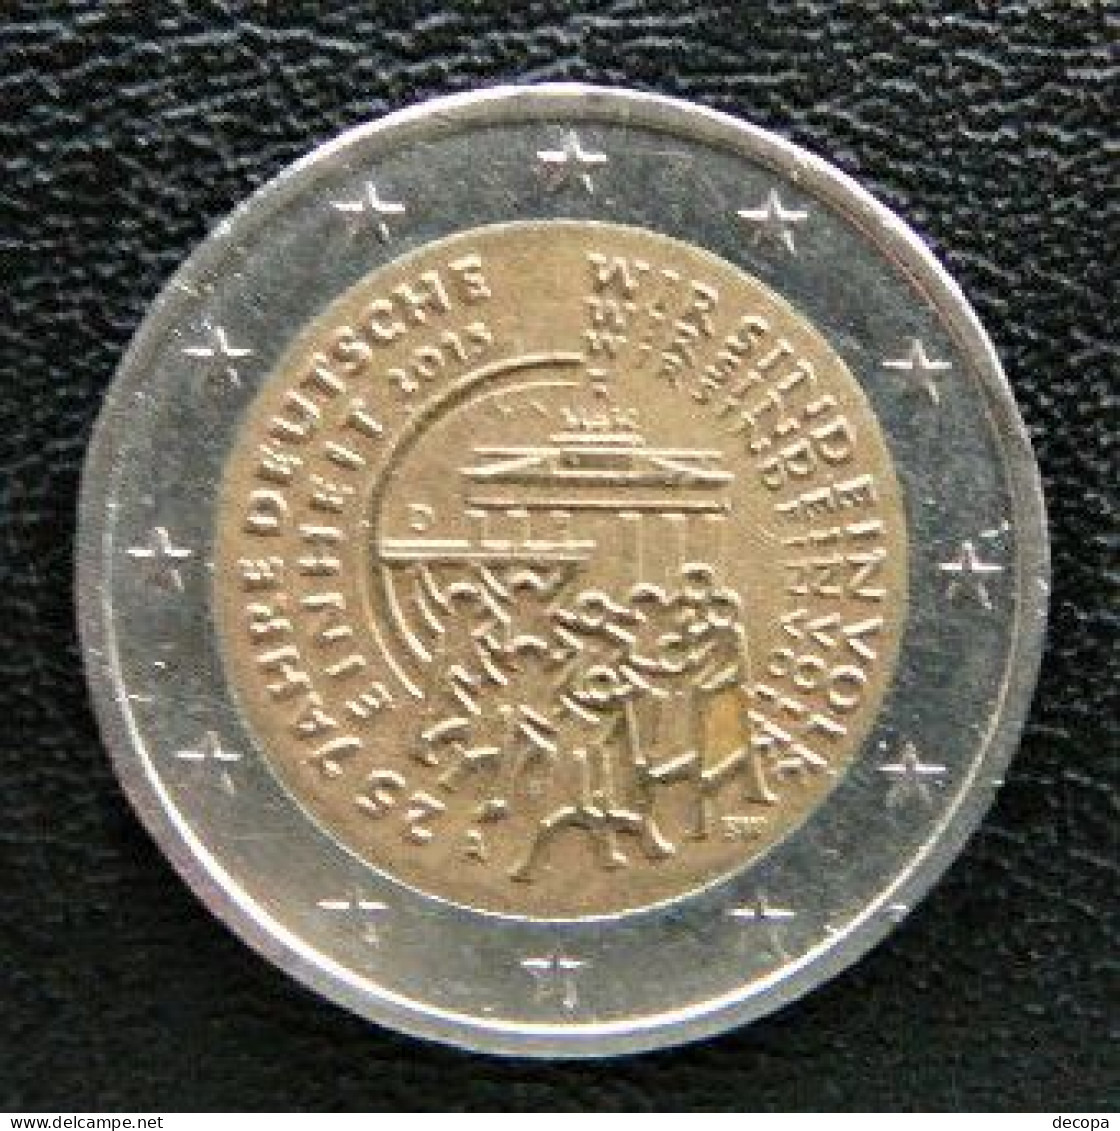 Germany - Allemagne - Duitsland   2 EURO 2015  A      Speciale Uitgave - Commemorative - Germany